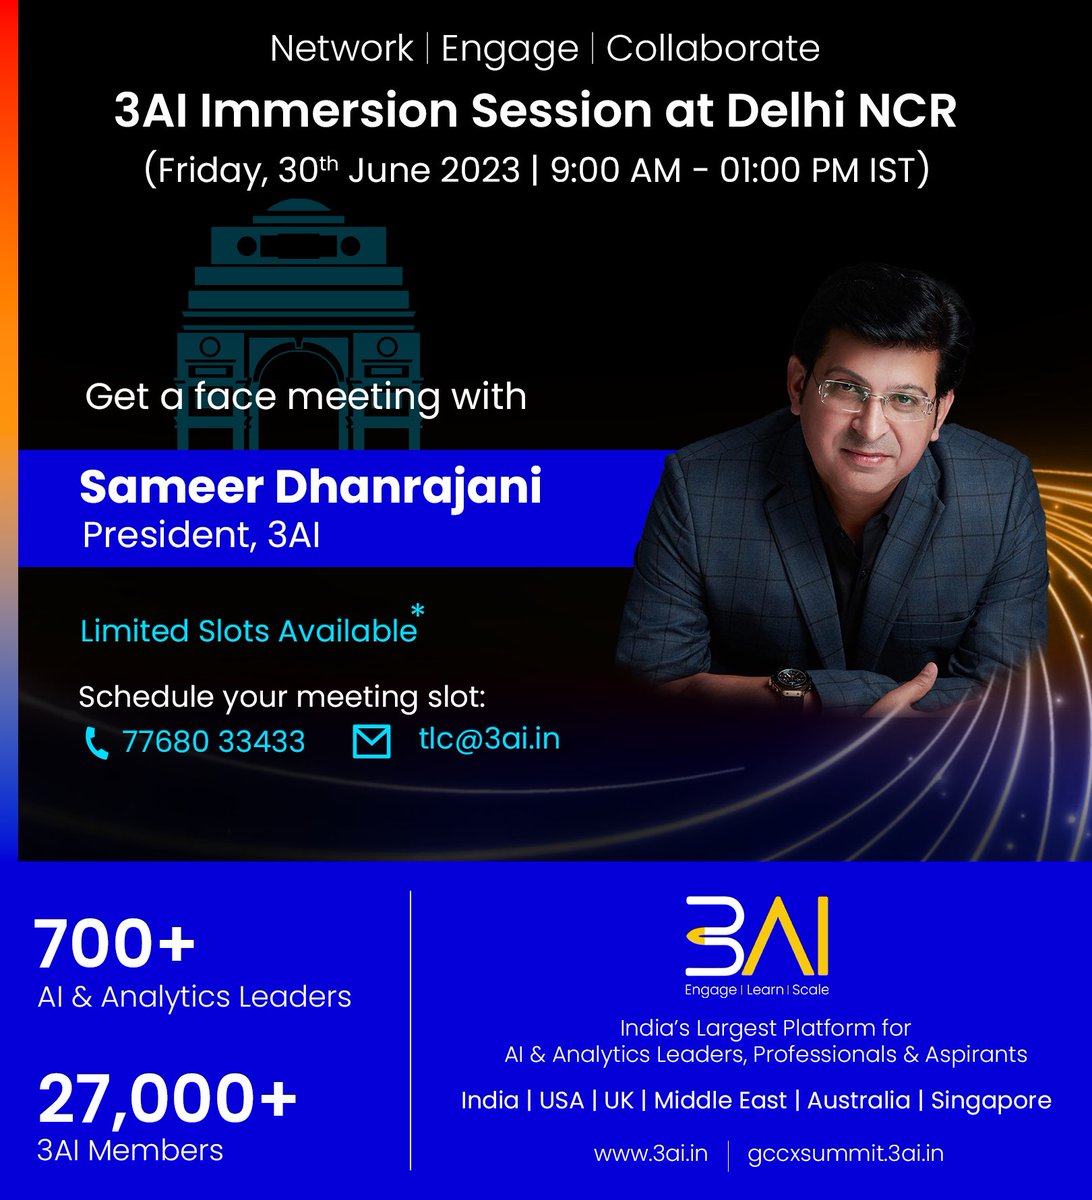 3AI Immersion Session in Delhi NCR Get a face meeting with Sameer Dhanrajani , President, 3AI Network | Engage | Collaborate Limited Slots Available Friday, 30th June 2023 | 9:00 AM - 01:00 PM #ai #data #analytics #dataanalytics #datascience #technology @DhanrajaniS